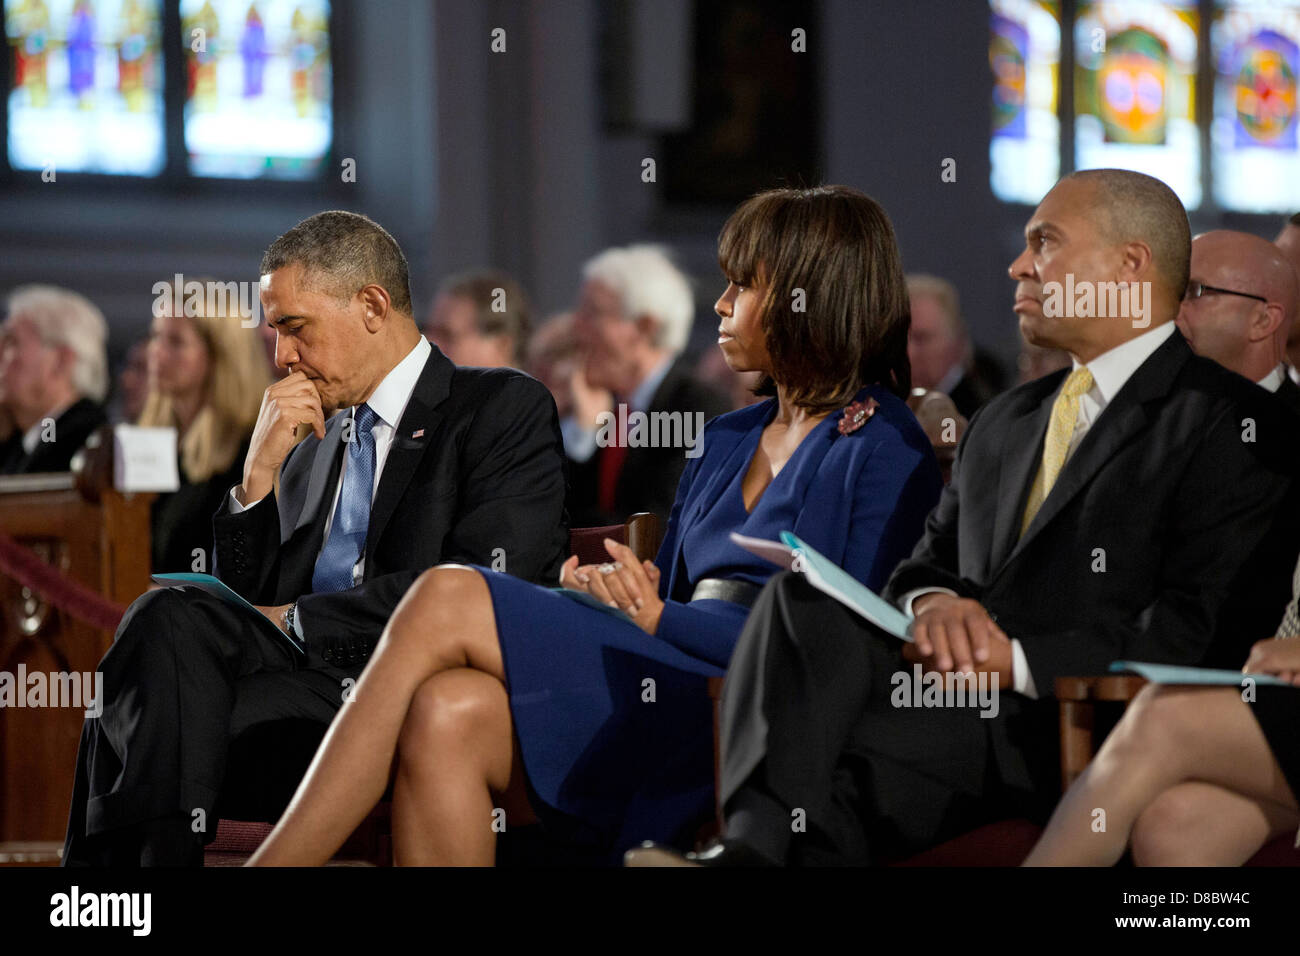 US President Barack Obama and First Lady Michelle Obama attend an interfaith prayer service dedicated to the victims of the Boston Marathon bombings at the Cathedral of the Holy Cross April 18, 2013 in Boston, MA. Massachusetts Governor Deval Patrick is seated at right. Stock Photo